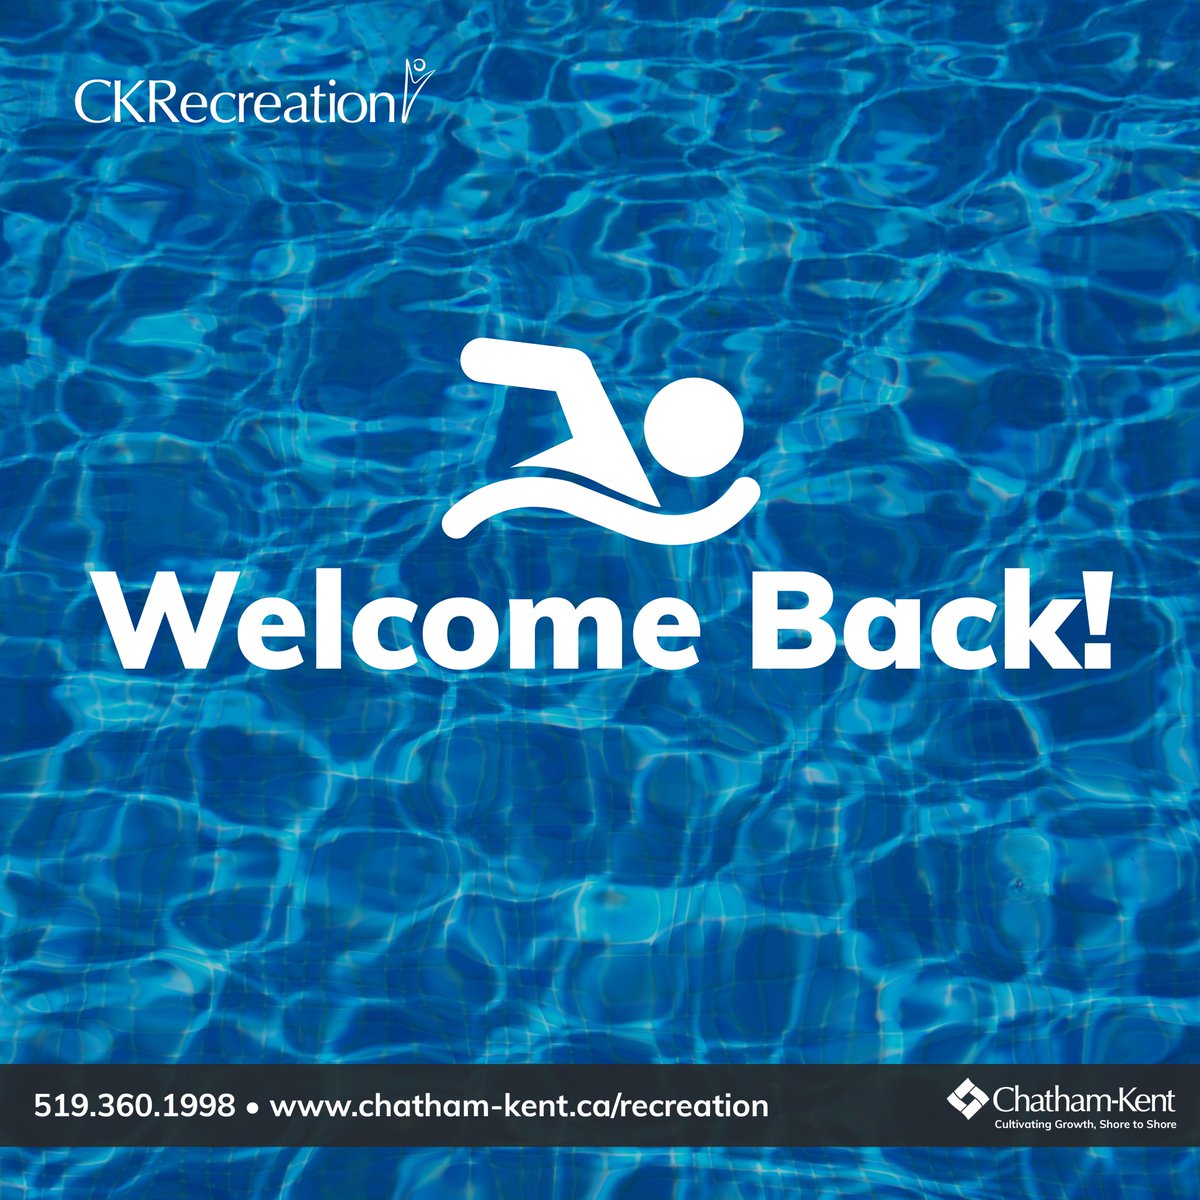 The CKRecreation team will welcome community members back to Gable Rees Rotary pool on Wednesday, October 7, 2020, followed by the Wallaceburg Sydenham District Pool later this fall. Check out chatham-kent.ca/recreation for more information!